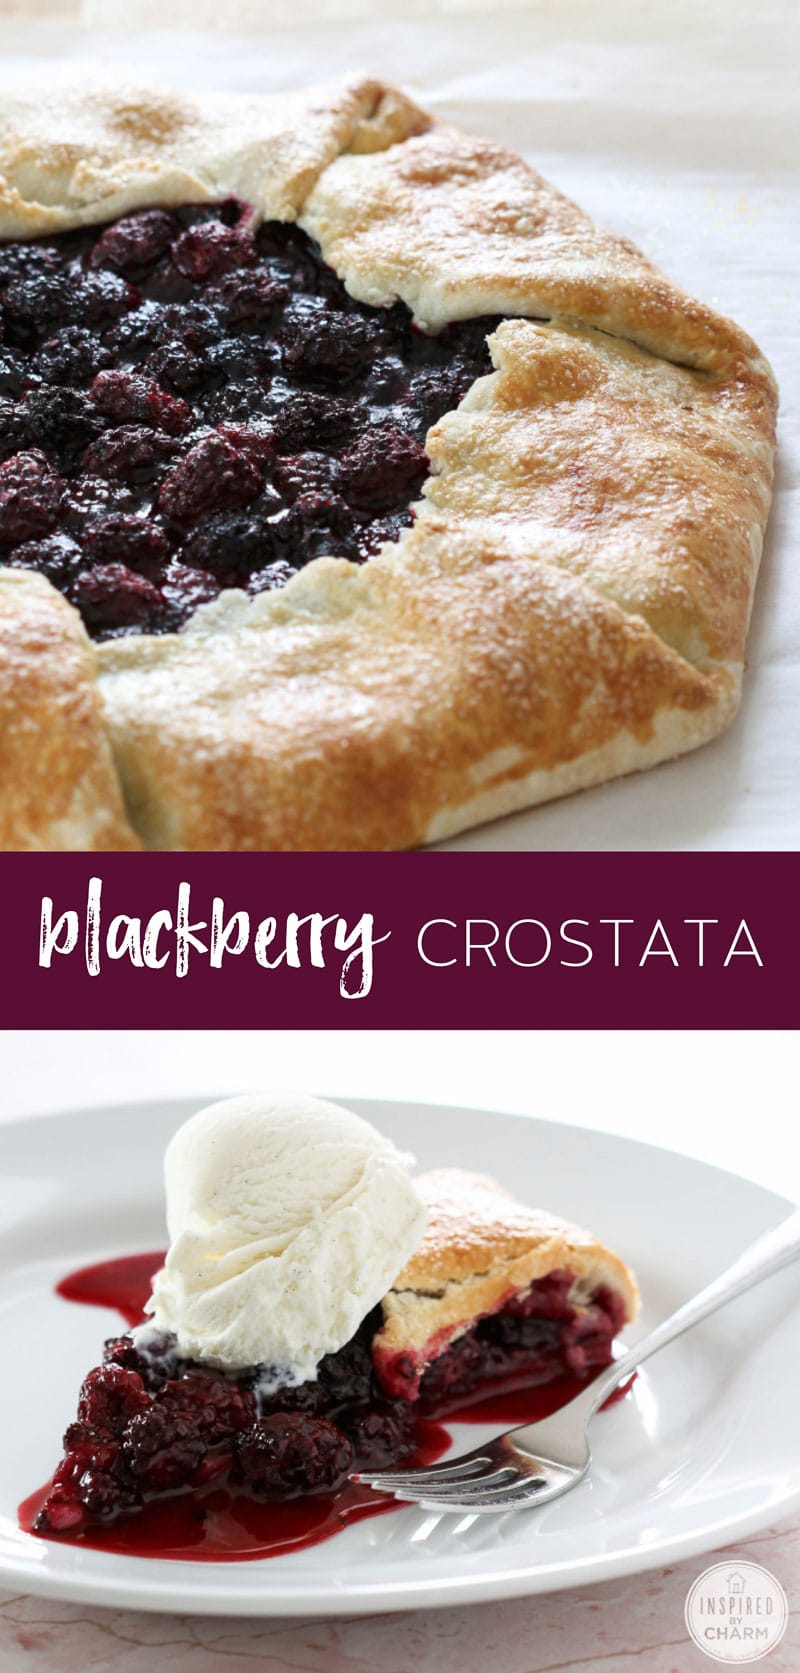 Crostata Recipe may become your new favorite summer dessert! #blackberry #crostata #summer #dessert #recipe